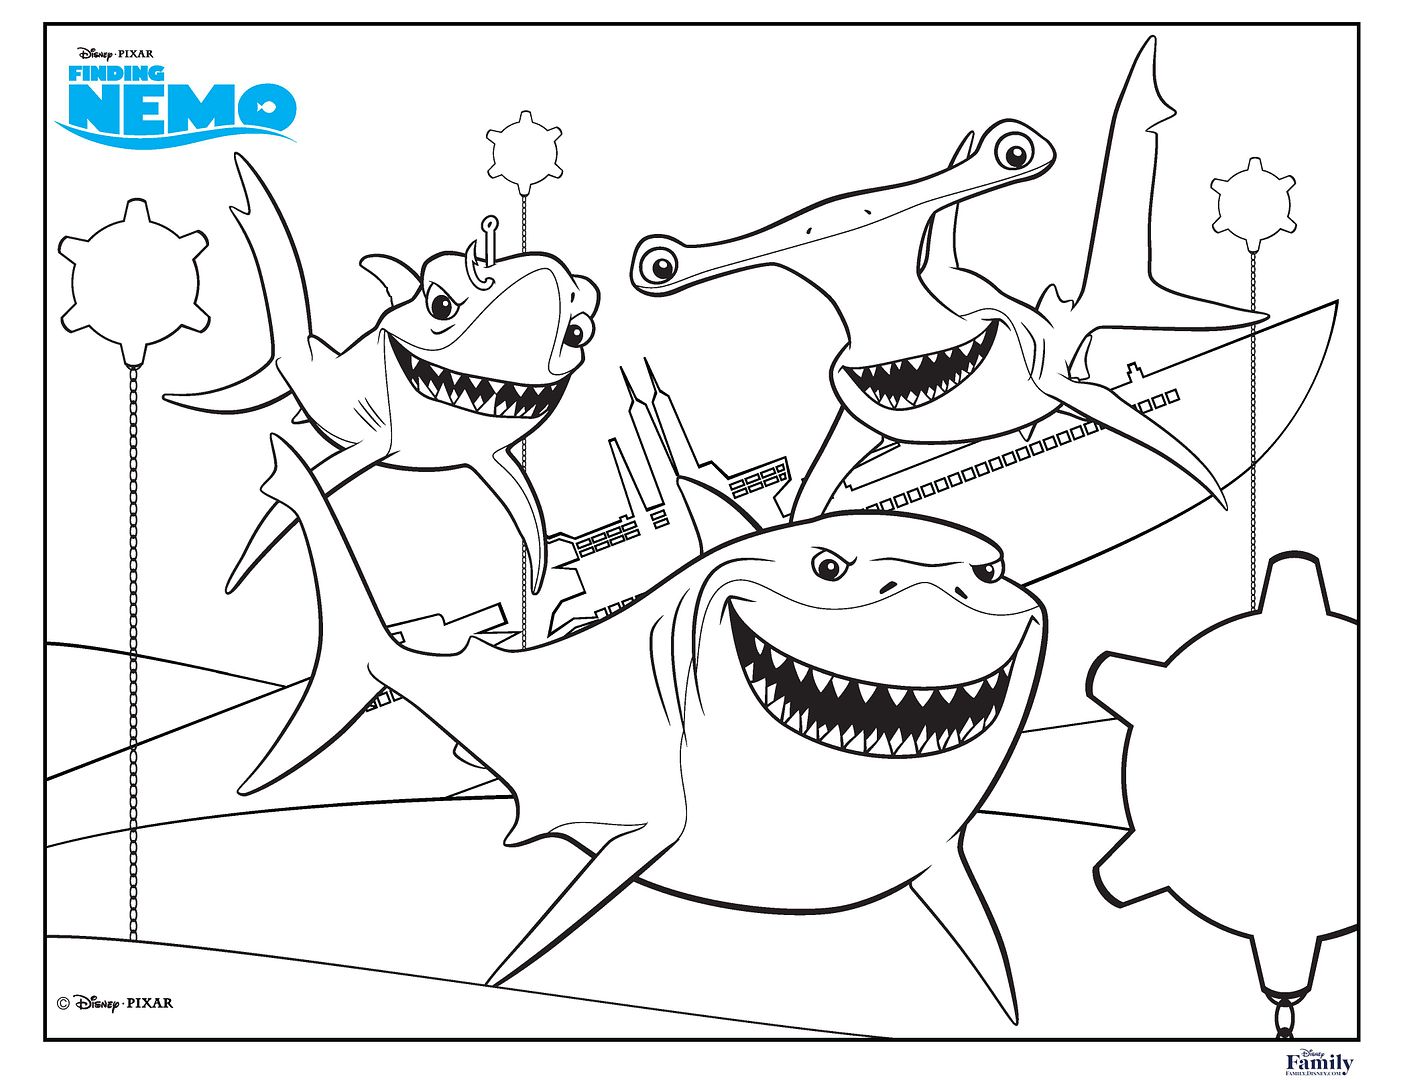 Free printable summer coloring pages: Finding Nemo sharks coloring page from Disney